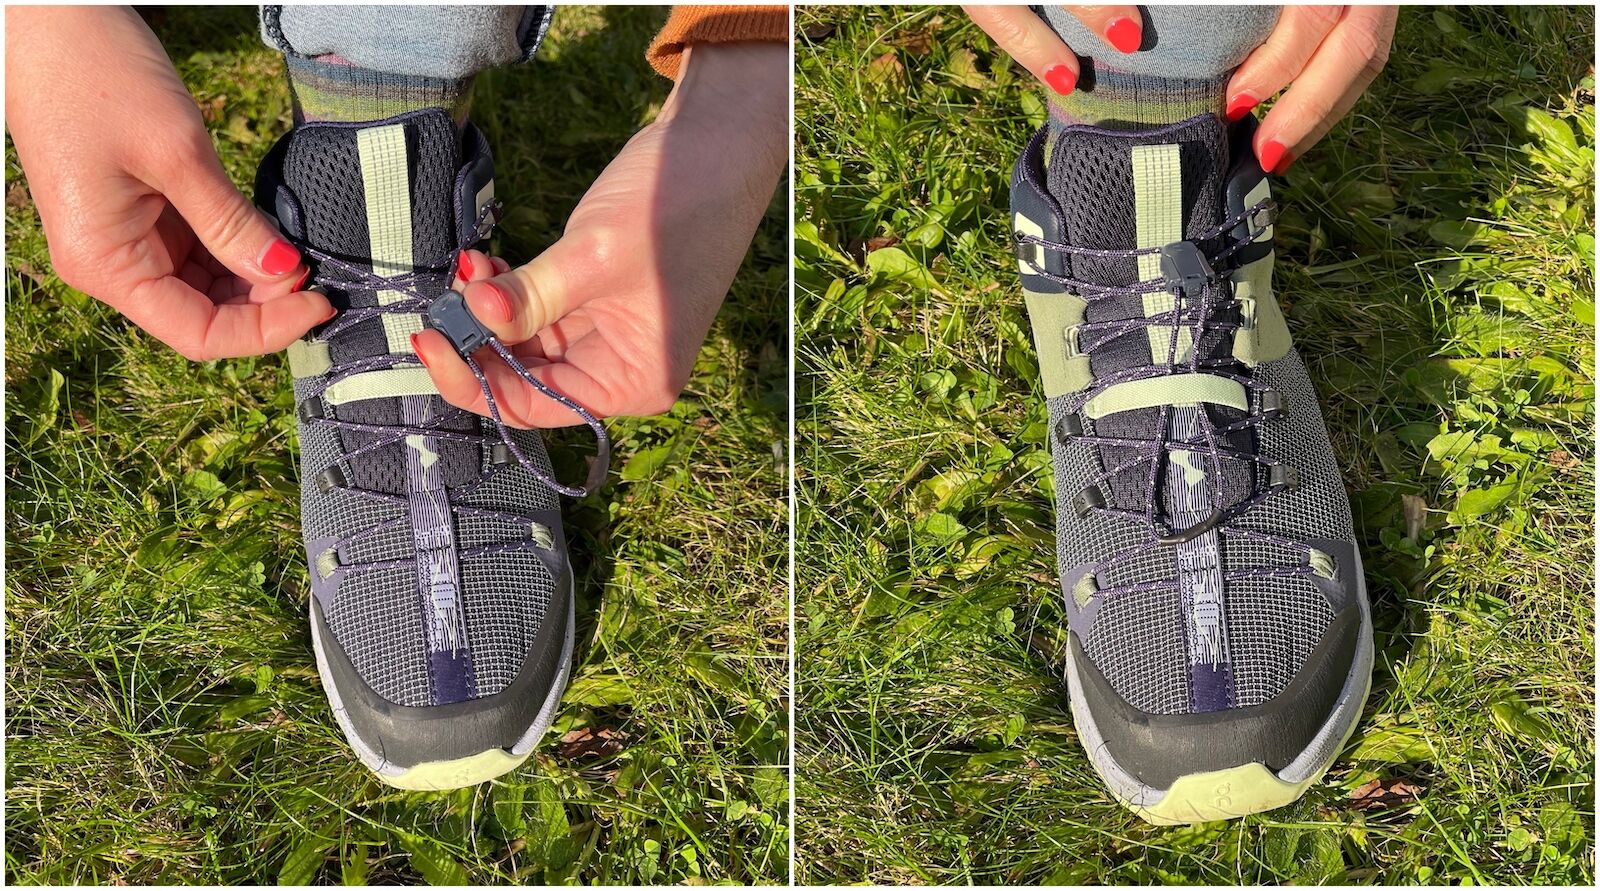 The laces on the Cloutrax On Cloud hiking shoes are unique and very practical